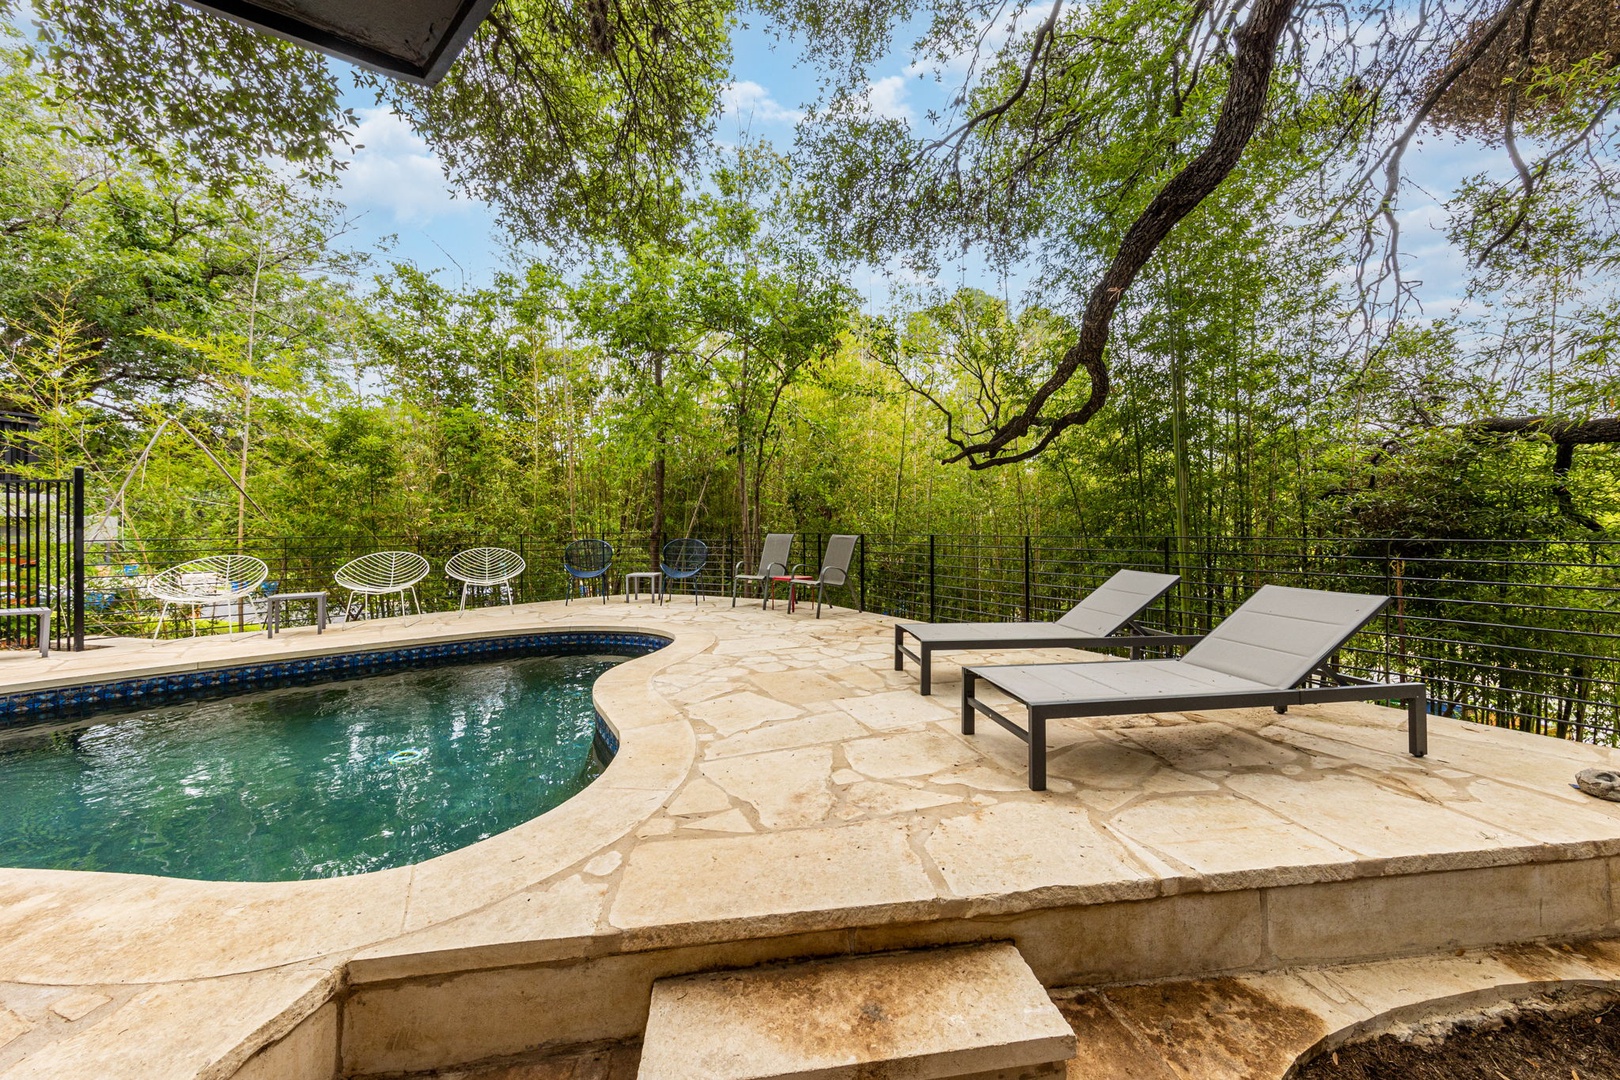 Pool with ample seating under lush trees